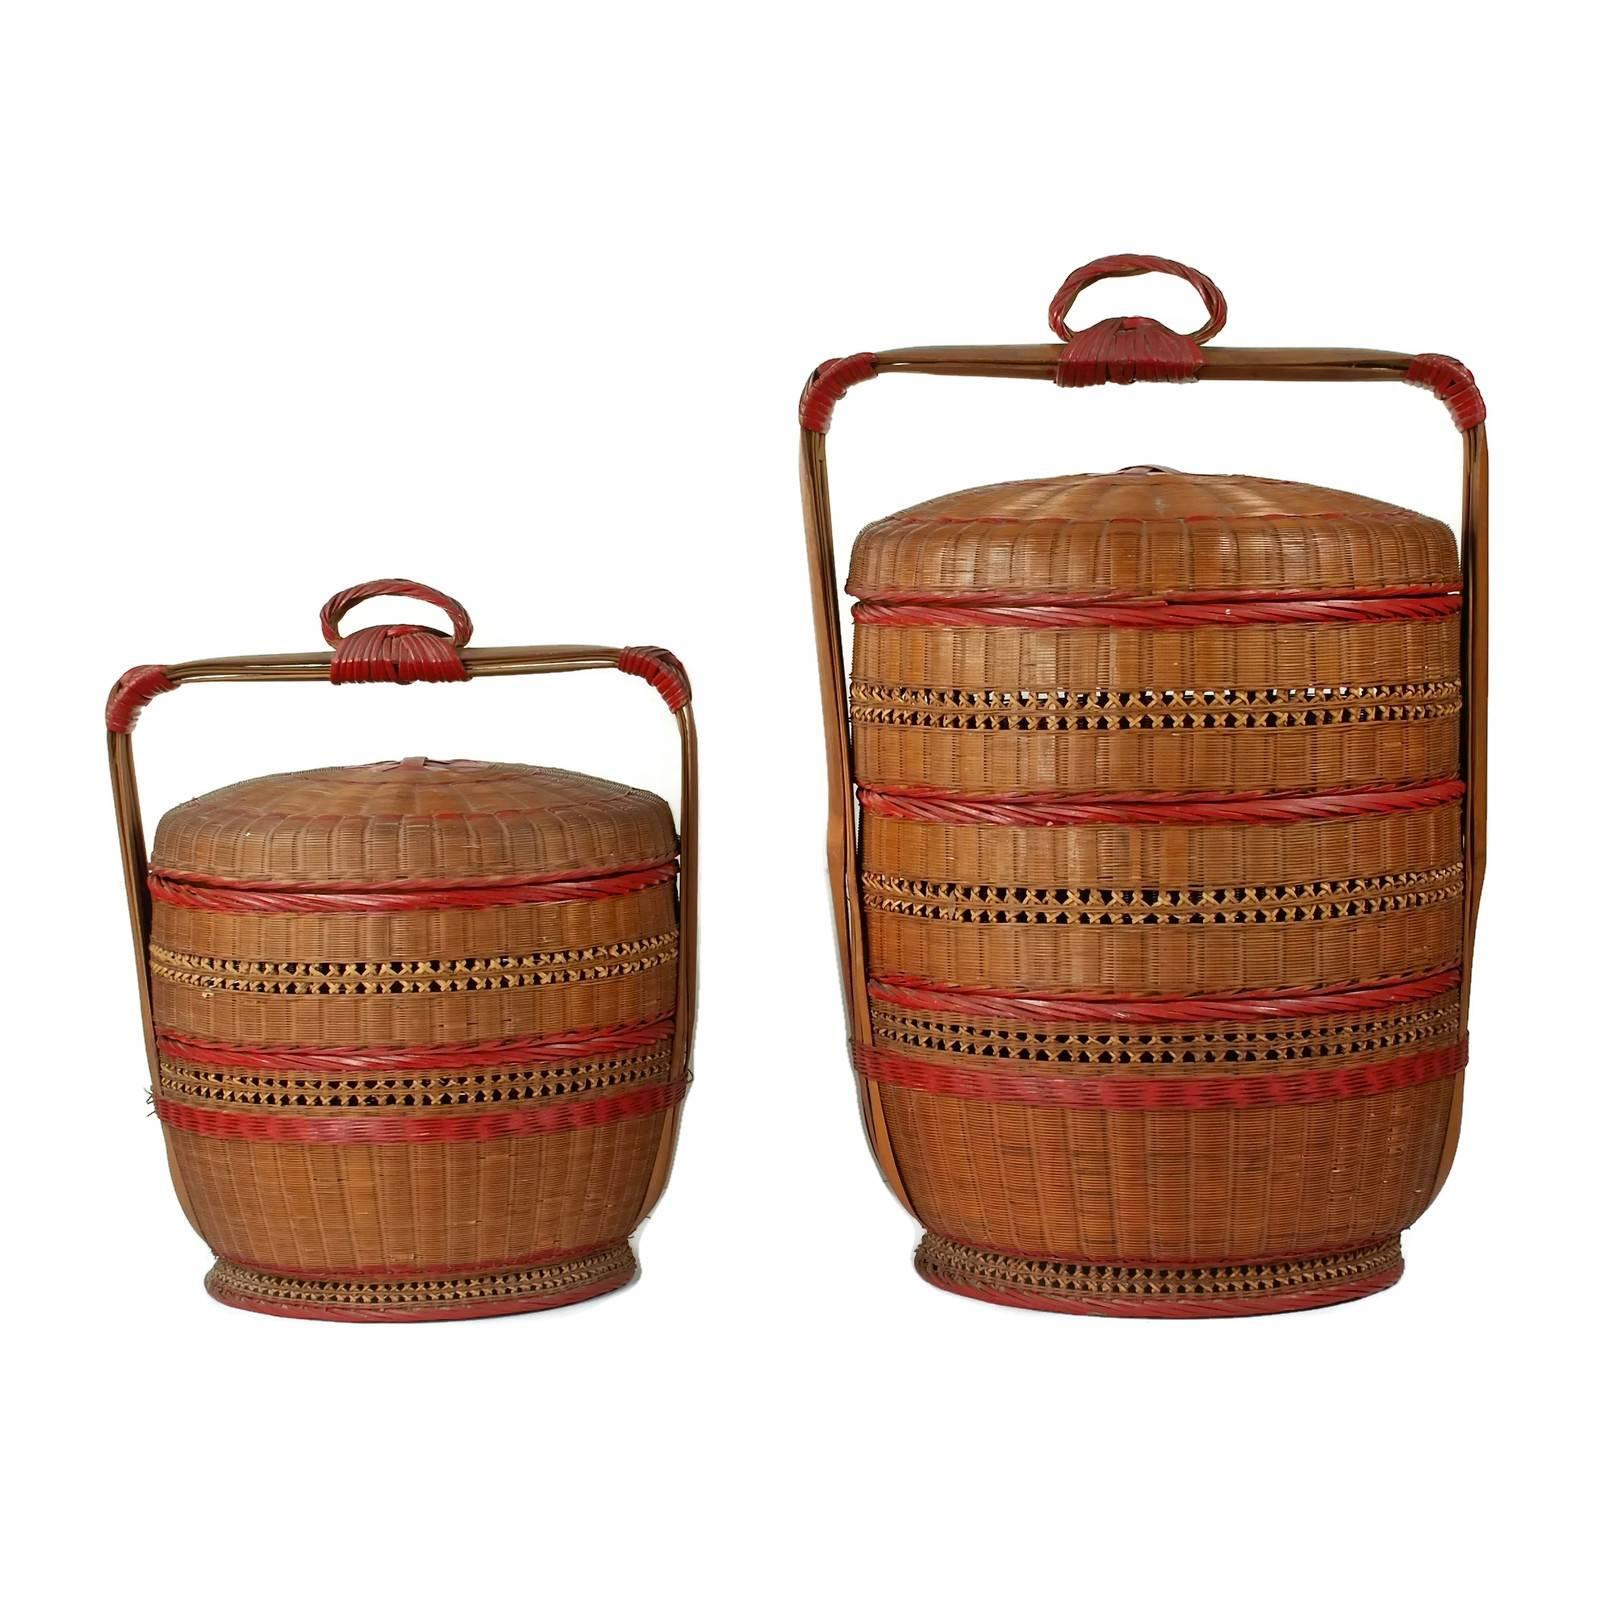 Pair of Early 20th Century Japanese Woven Bamboo Tiered Wedding Baskets